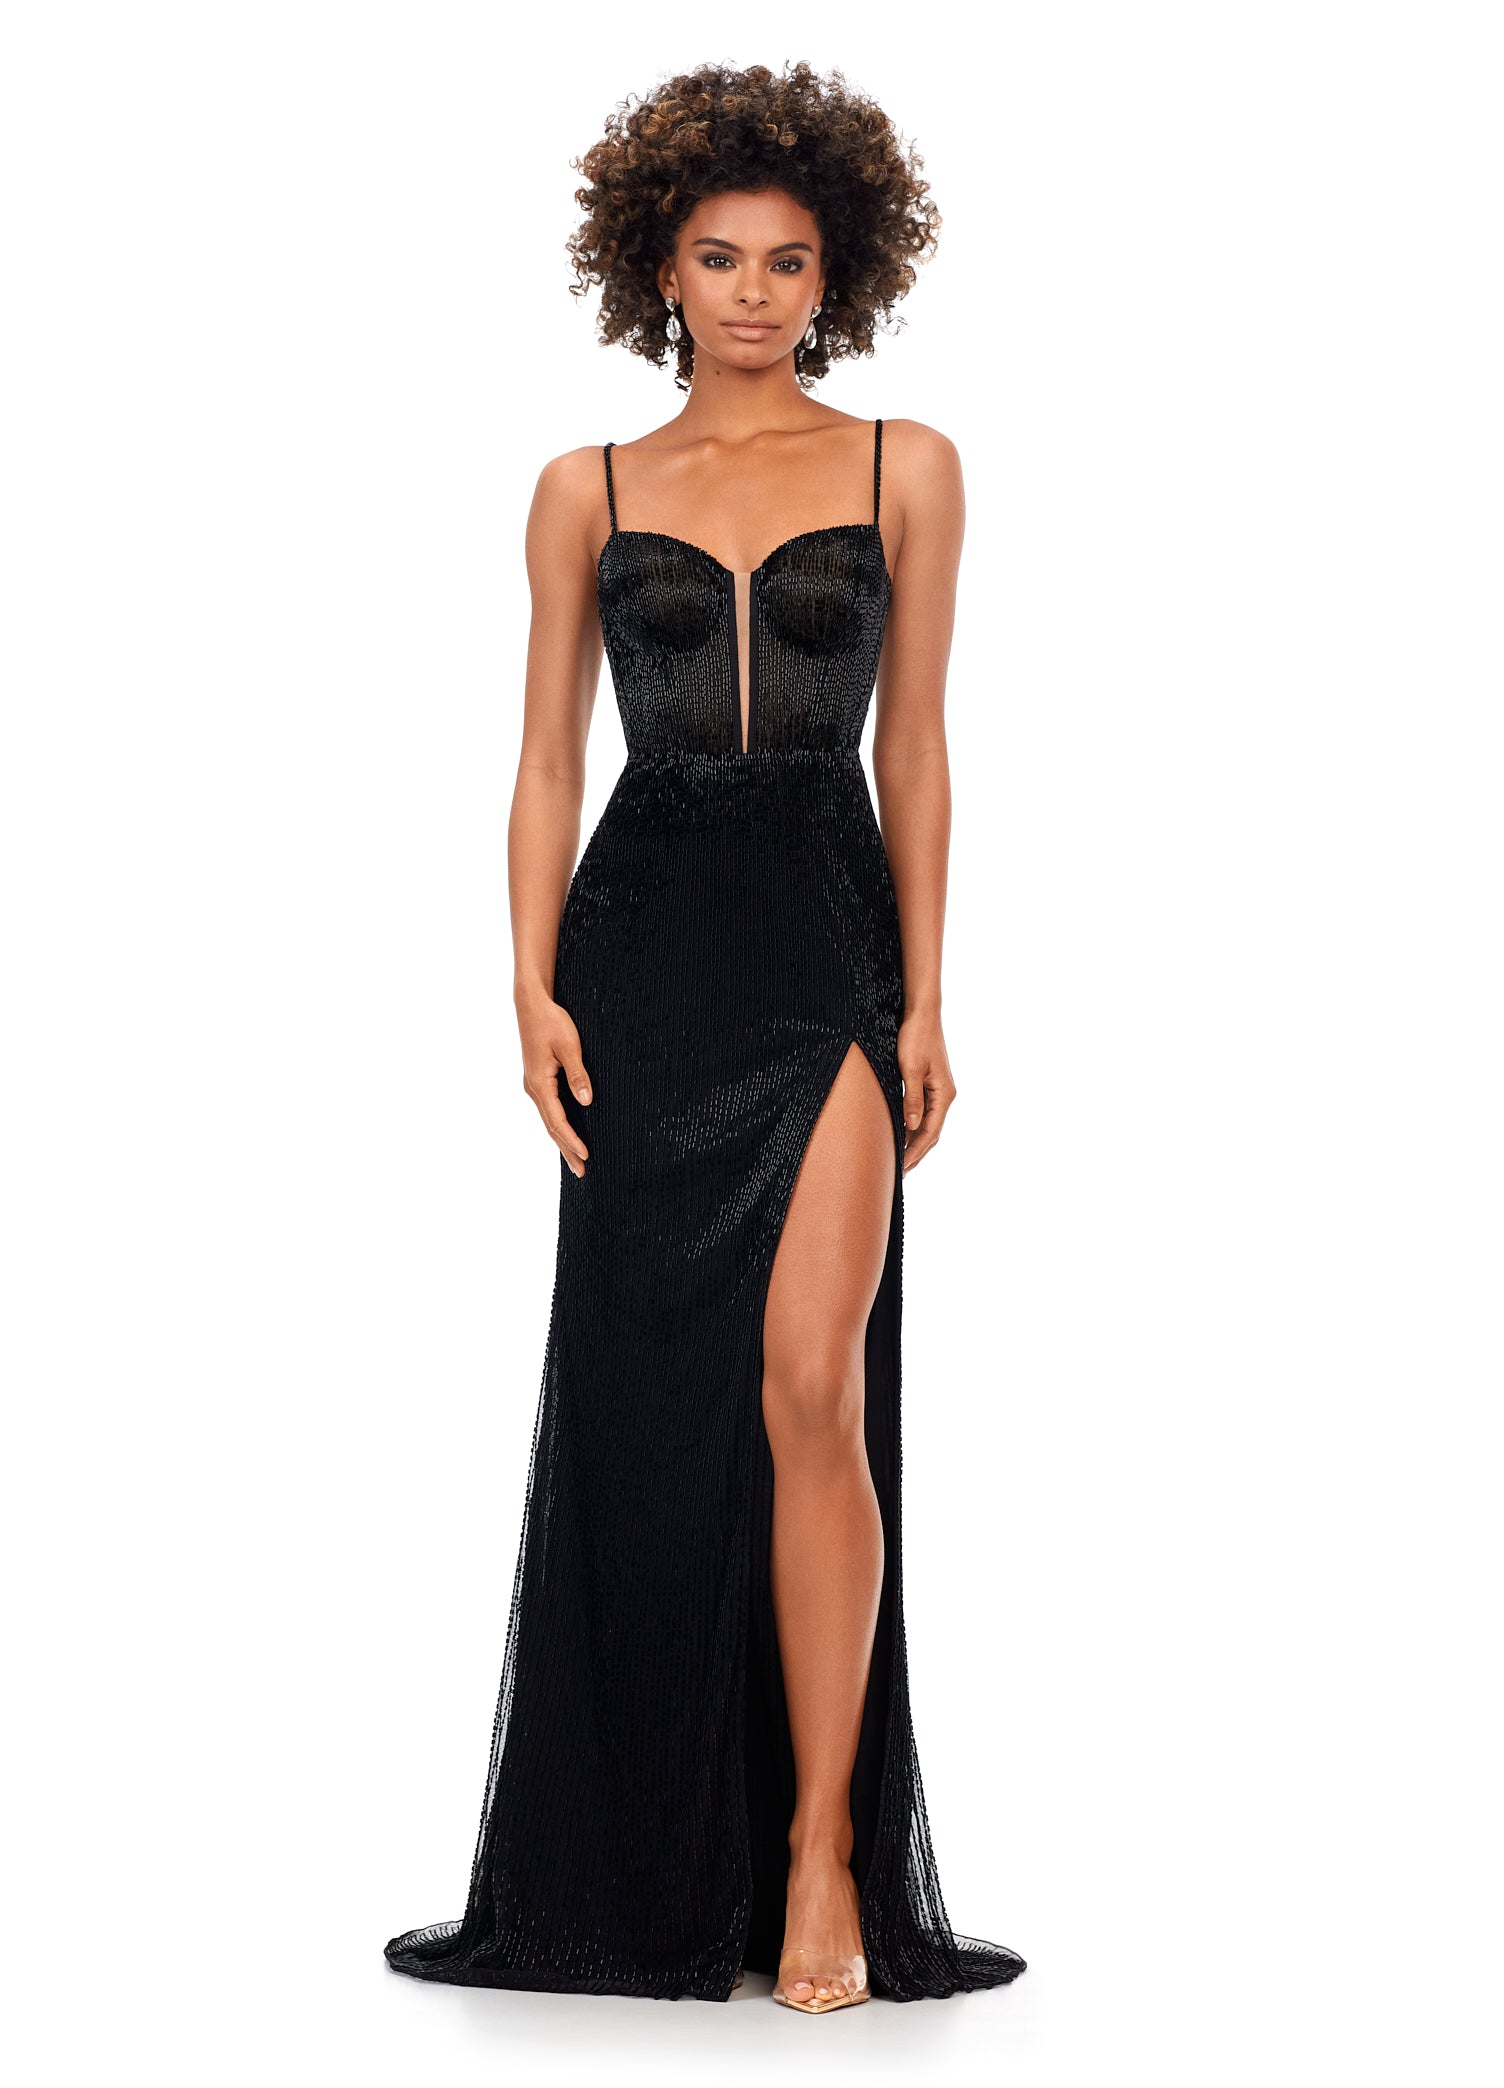 Ashley Lauren 11369 This Black liquid beaded style features an exposed bustier that is sure to accentuate your curves. The look is complete with sweep train and left leg slit.